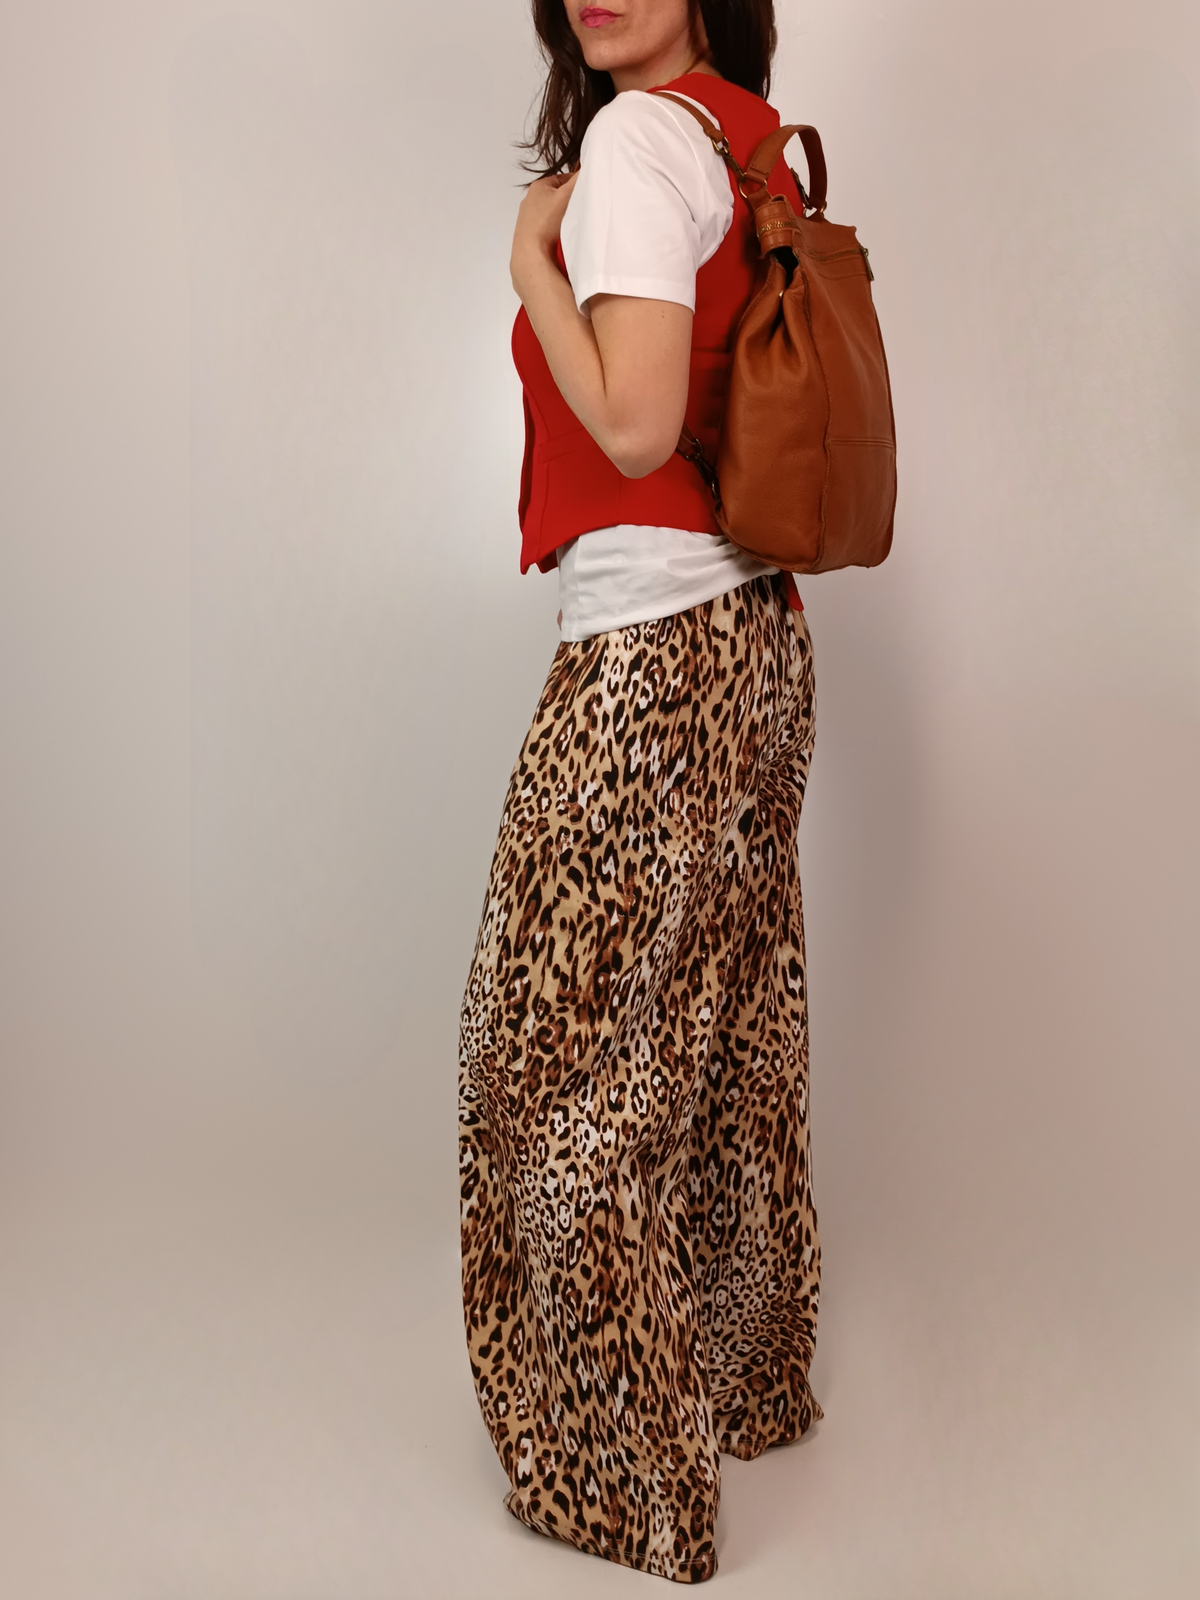 Pantalone animalier con coulisse